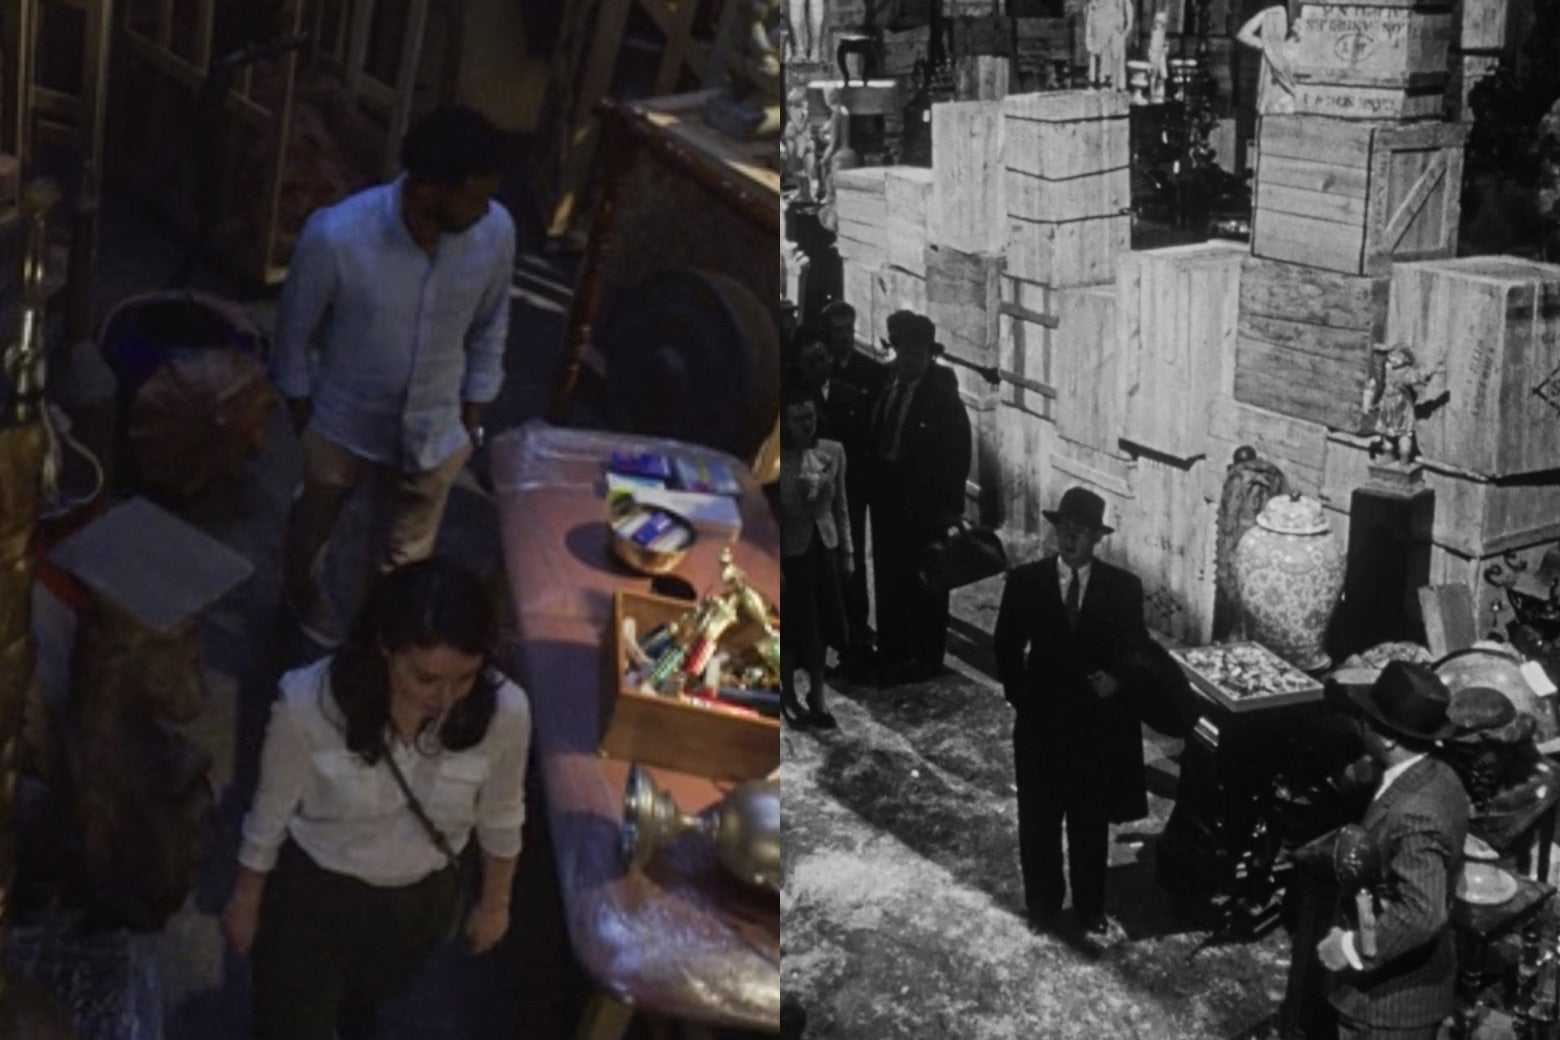 A side-by-side of the final scenes of Citizen Kane and The Good Fight's latest season, both showing investigators navigating a labyrinthine warehouse of old possessions.